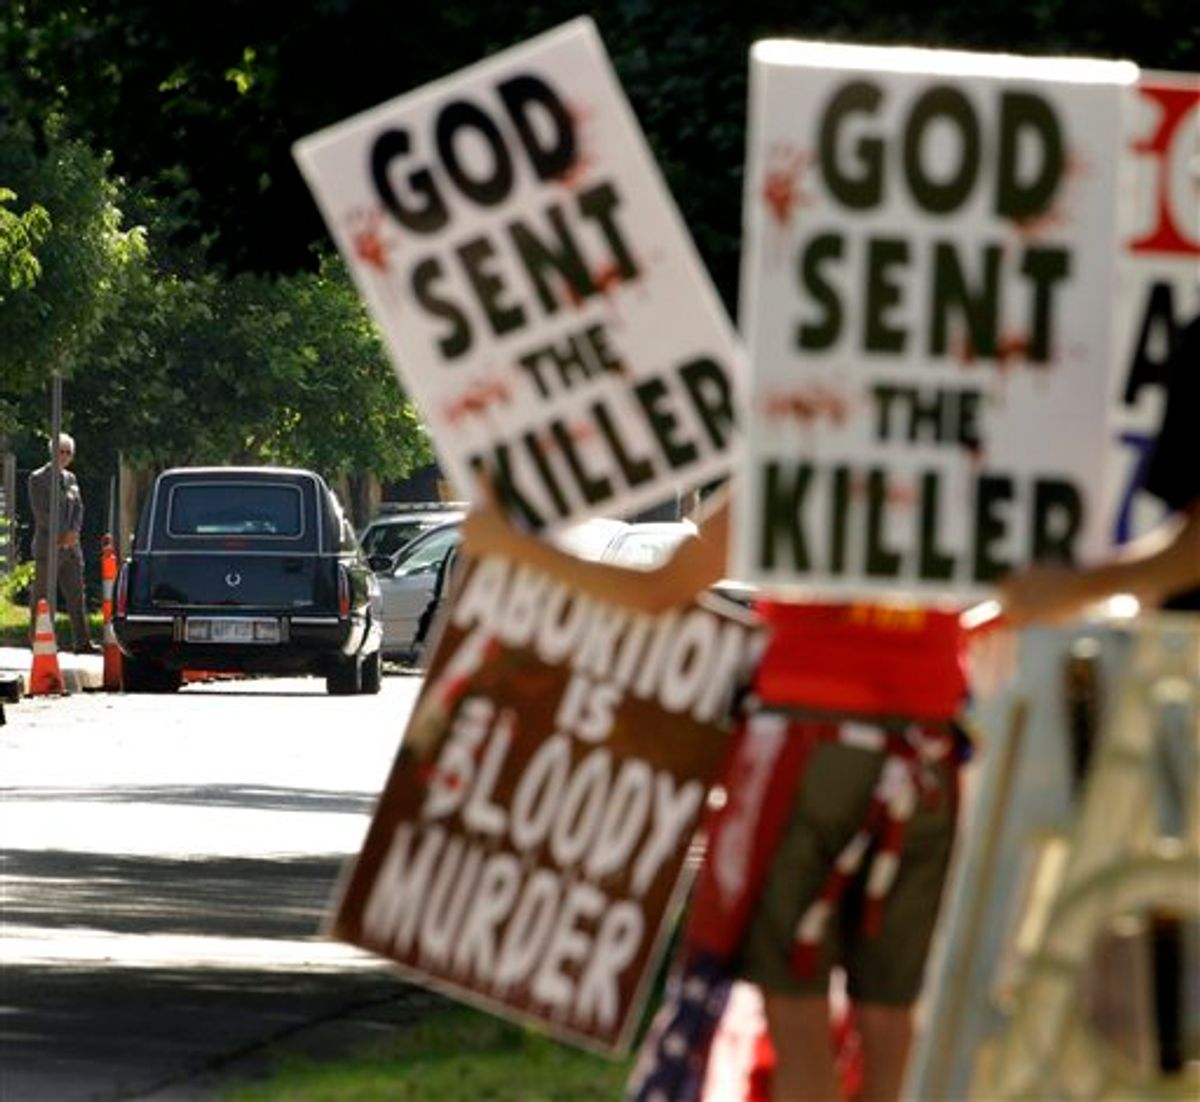 FILE - In this June 6, 2009 file photo, protesters from Rev. Fred Phelps' Westboro Baptist Church demonstrate during funeral services for Dr. George Tiller at College Hill United Methodist Church in Wichita, Kan. In an 8-1 ruling, the U.S. Supreme Court ruled the group's protests were protected by the First Amendment. The father of a Marine killed in Iraq sued after they picketed his son's 2006 funeral service.(AP Photo/Charlie Riedel, File) (AP)